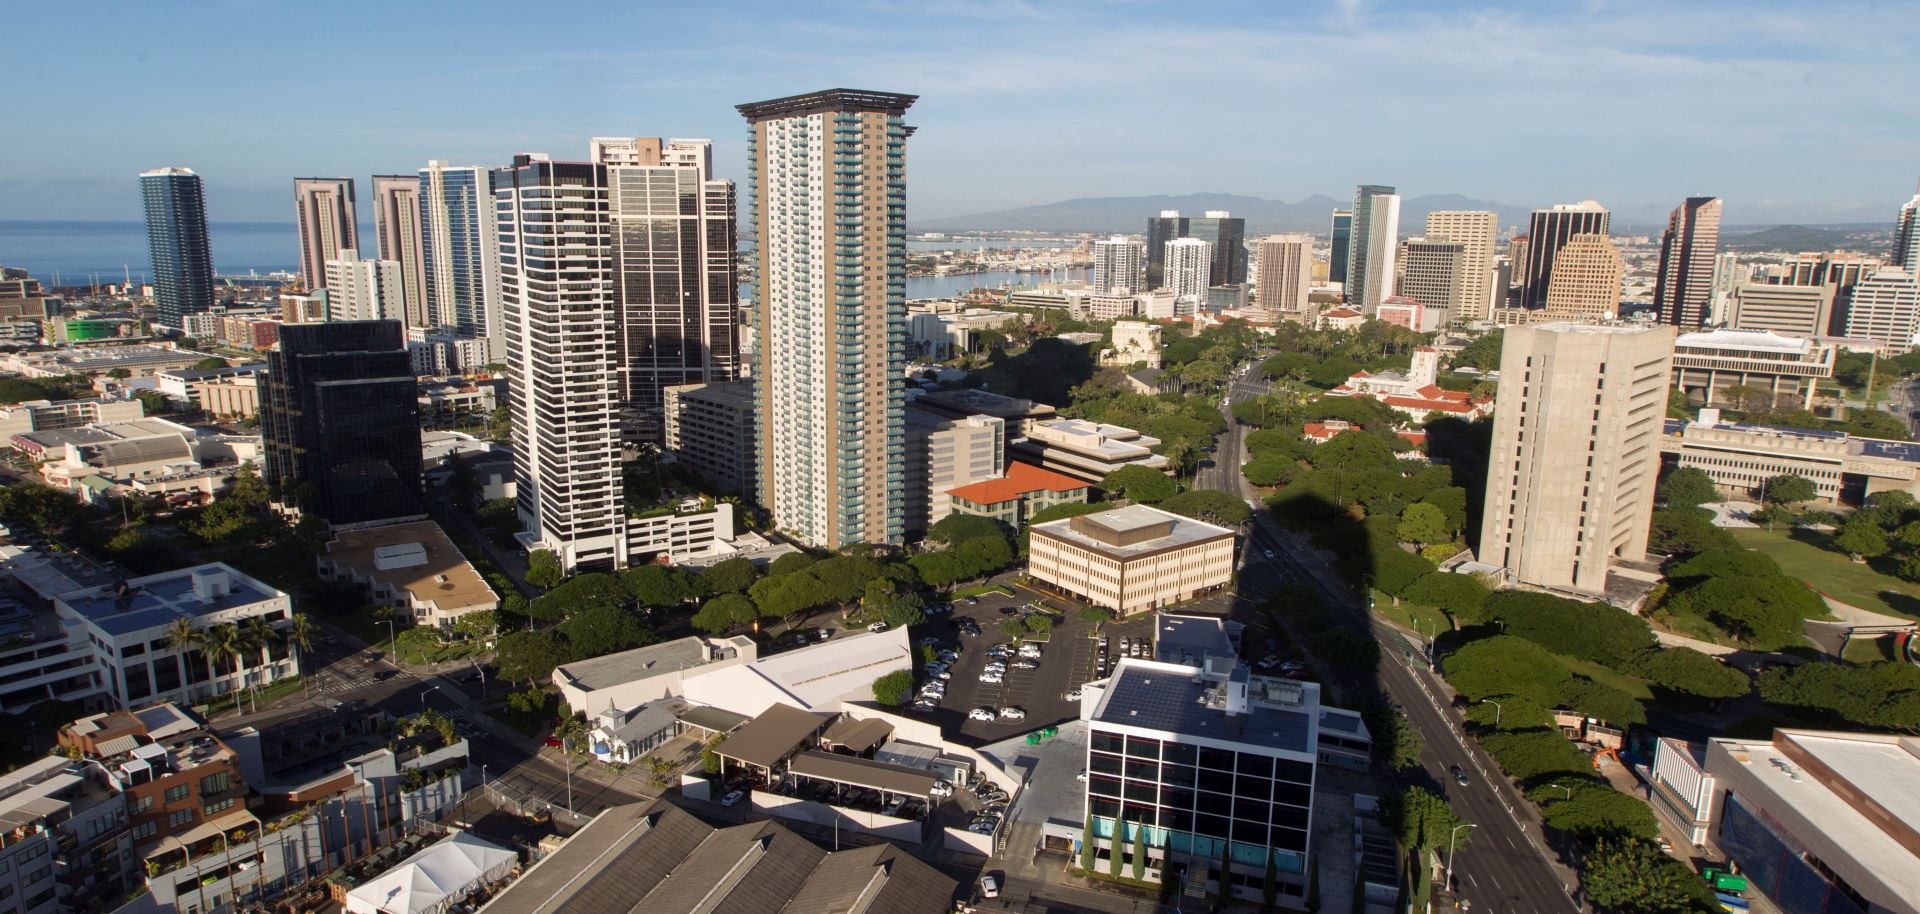 Honolulu, the capital of Hawaii, looked peaceful on the morning on Jan. 13, 2018, despite the emergency alert that many residents of the state received on their cellphones warning of an incoming missile.